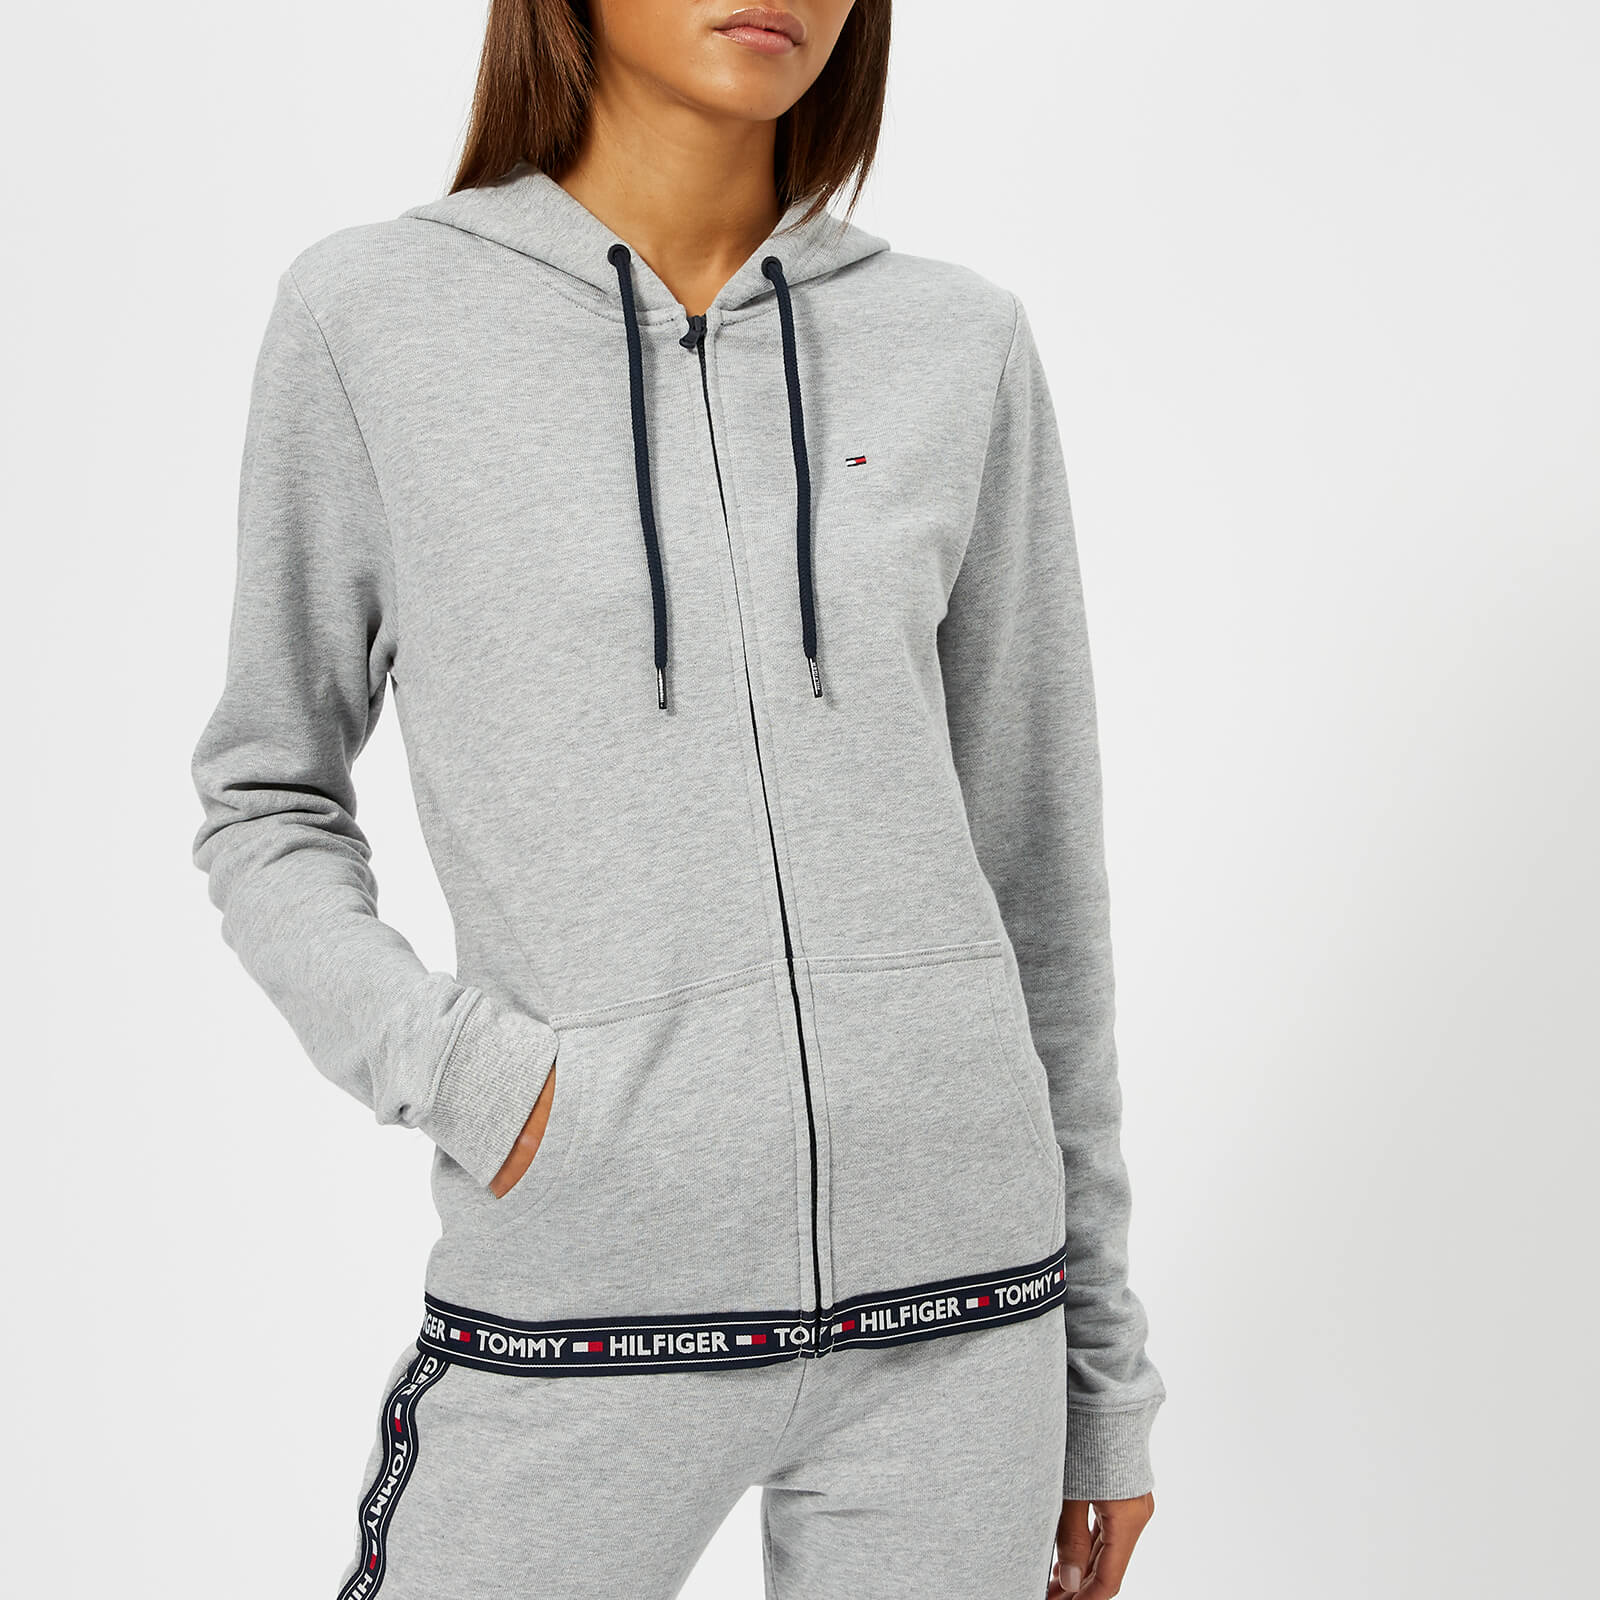 Tommy Hilfiger Women's Hoody Zip Top with Logo Trim at the Bottom - Grey - S